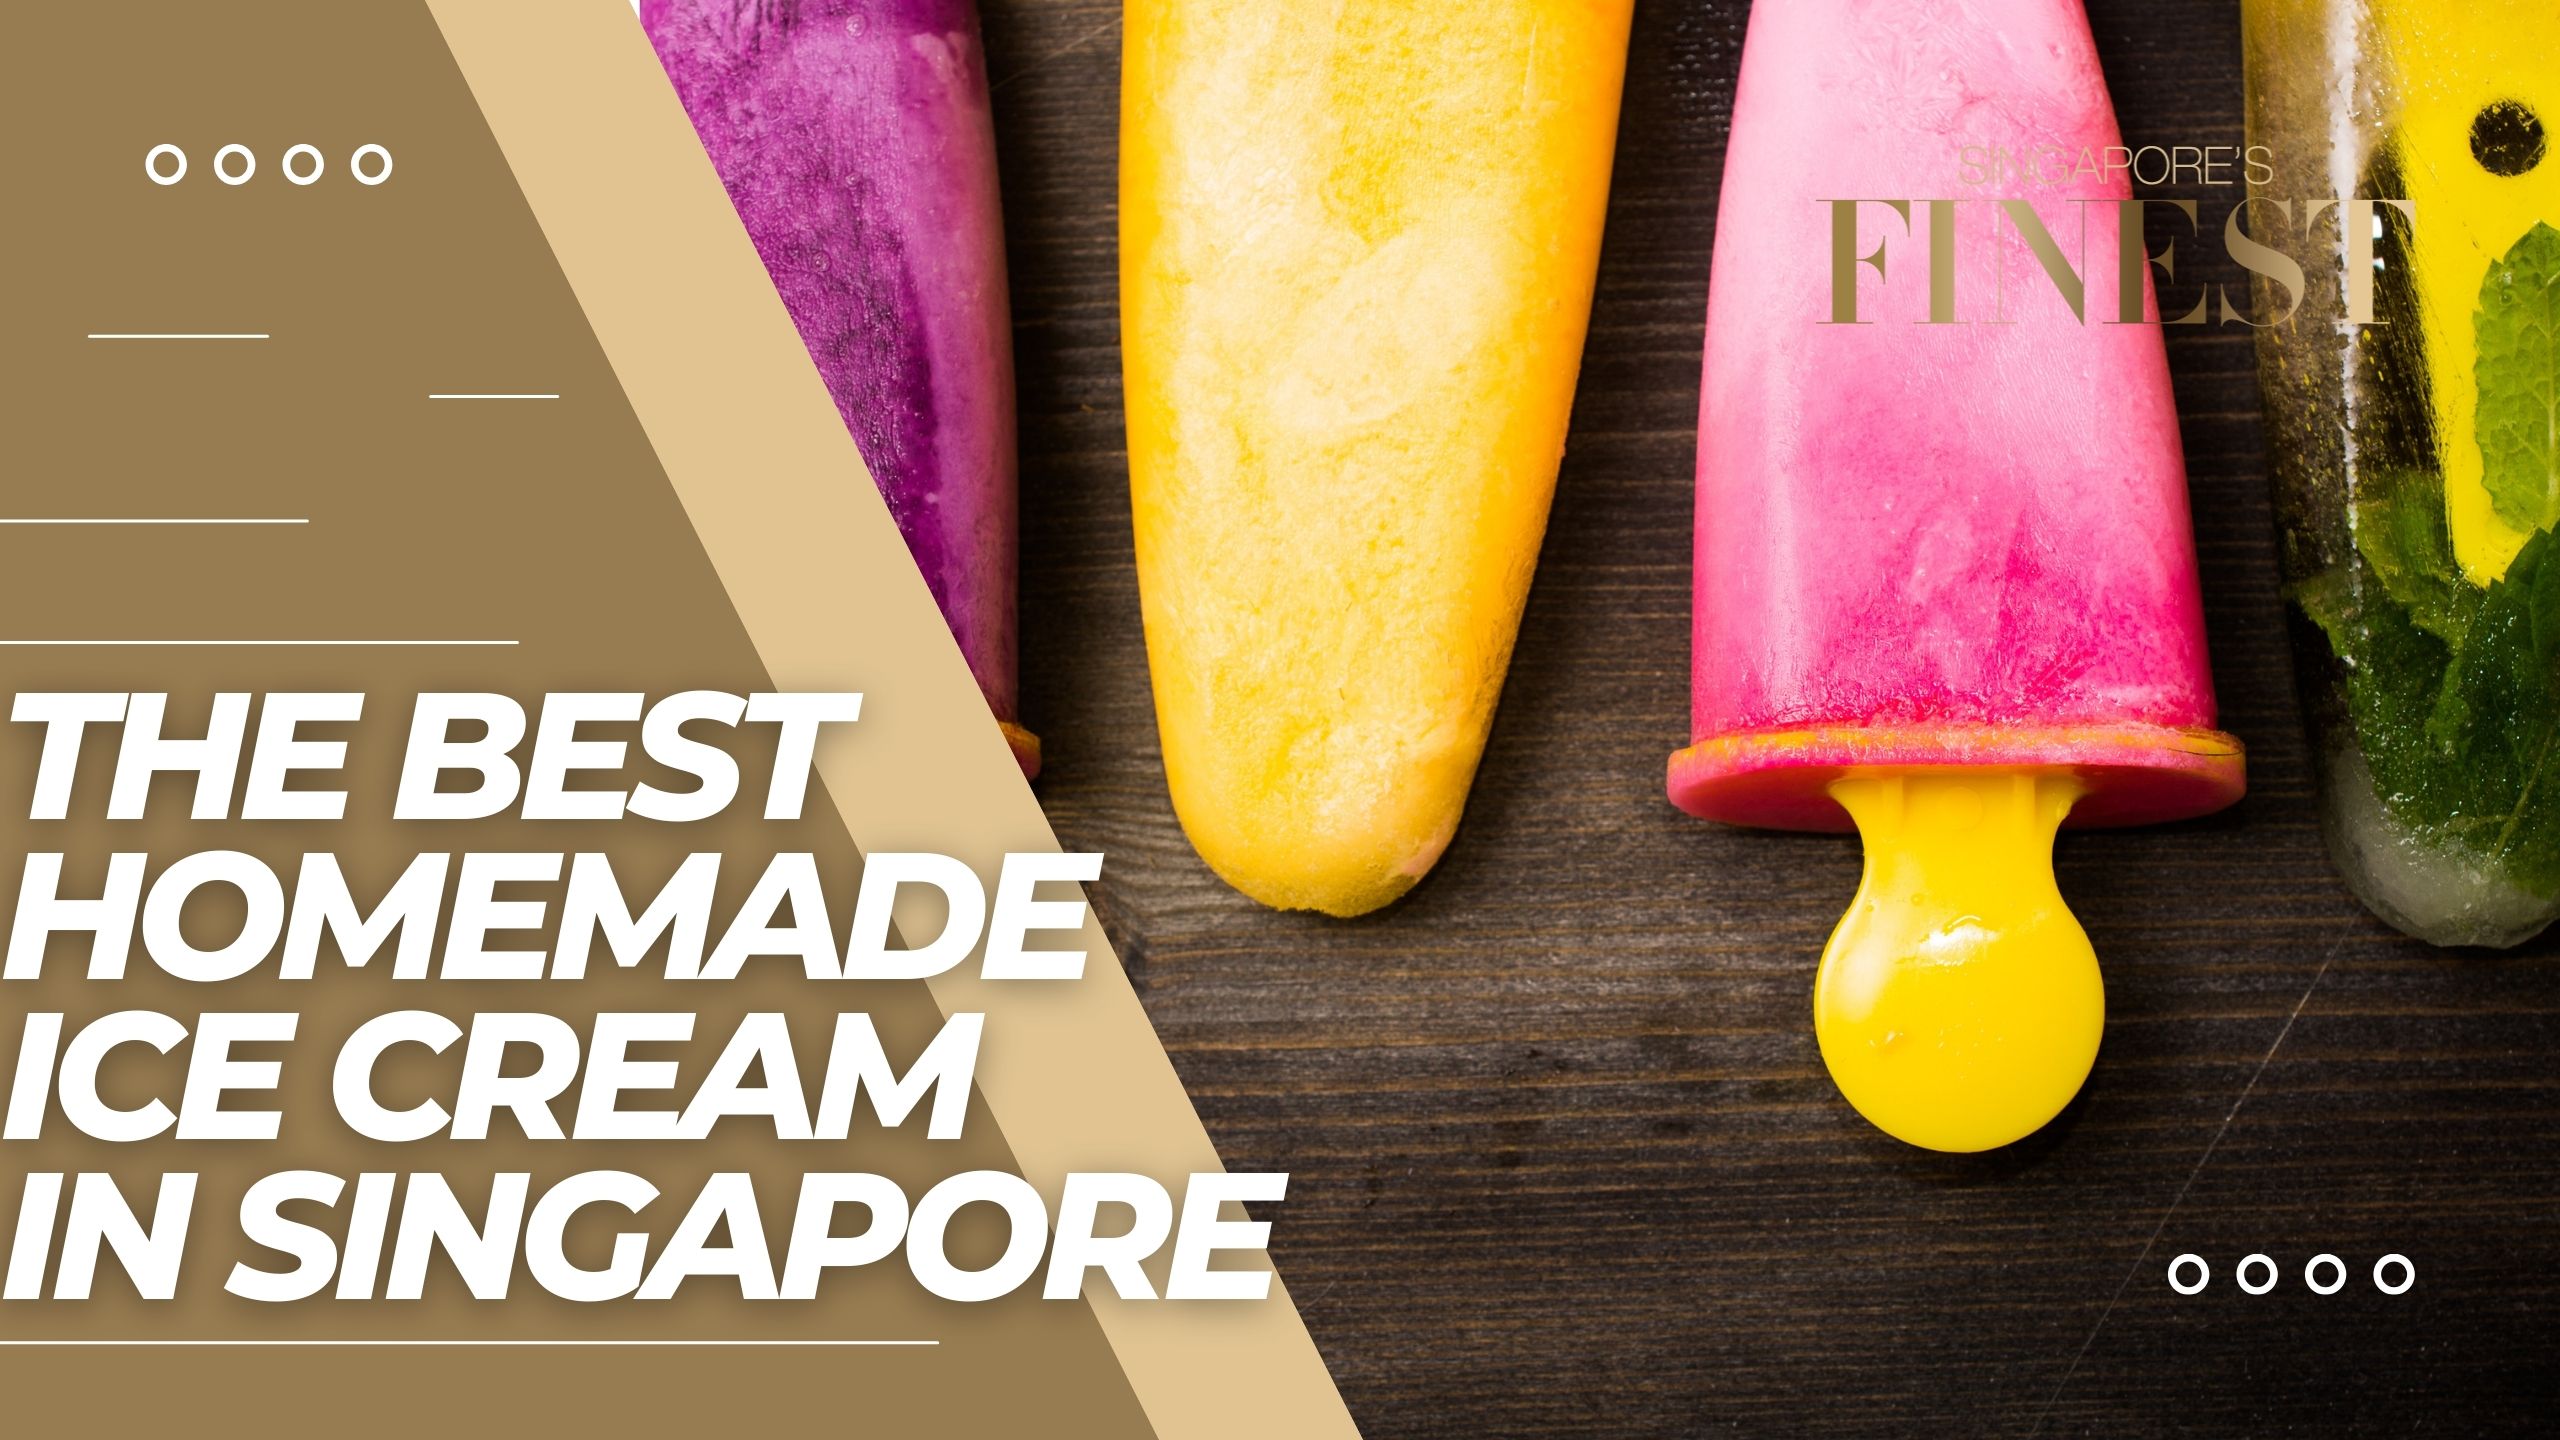 The Finest Homemade Ice Cream in Singapore